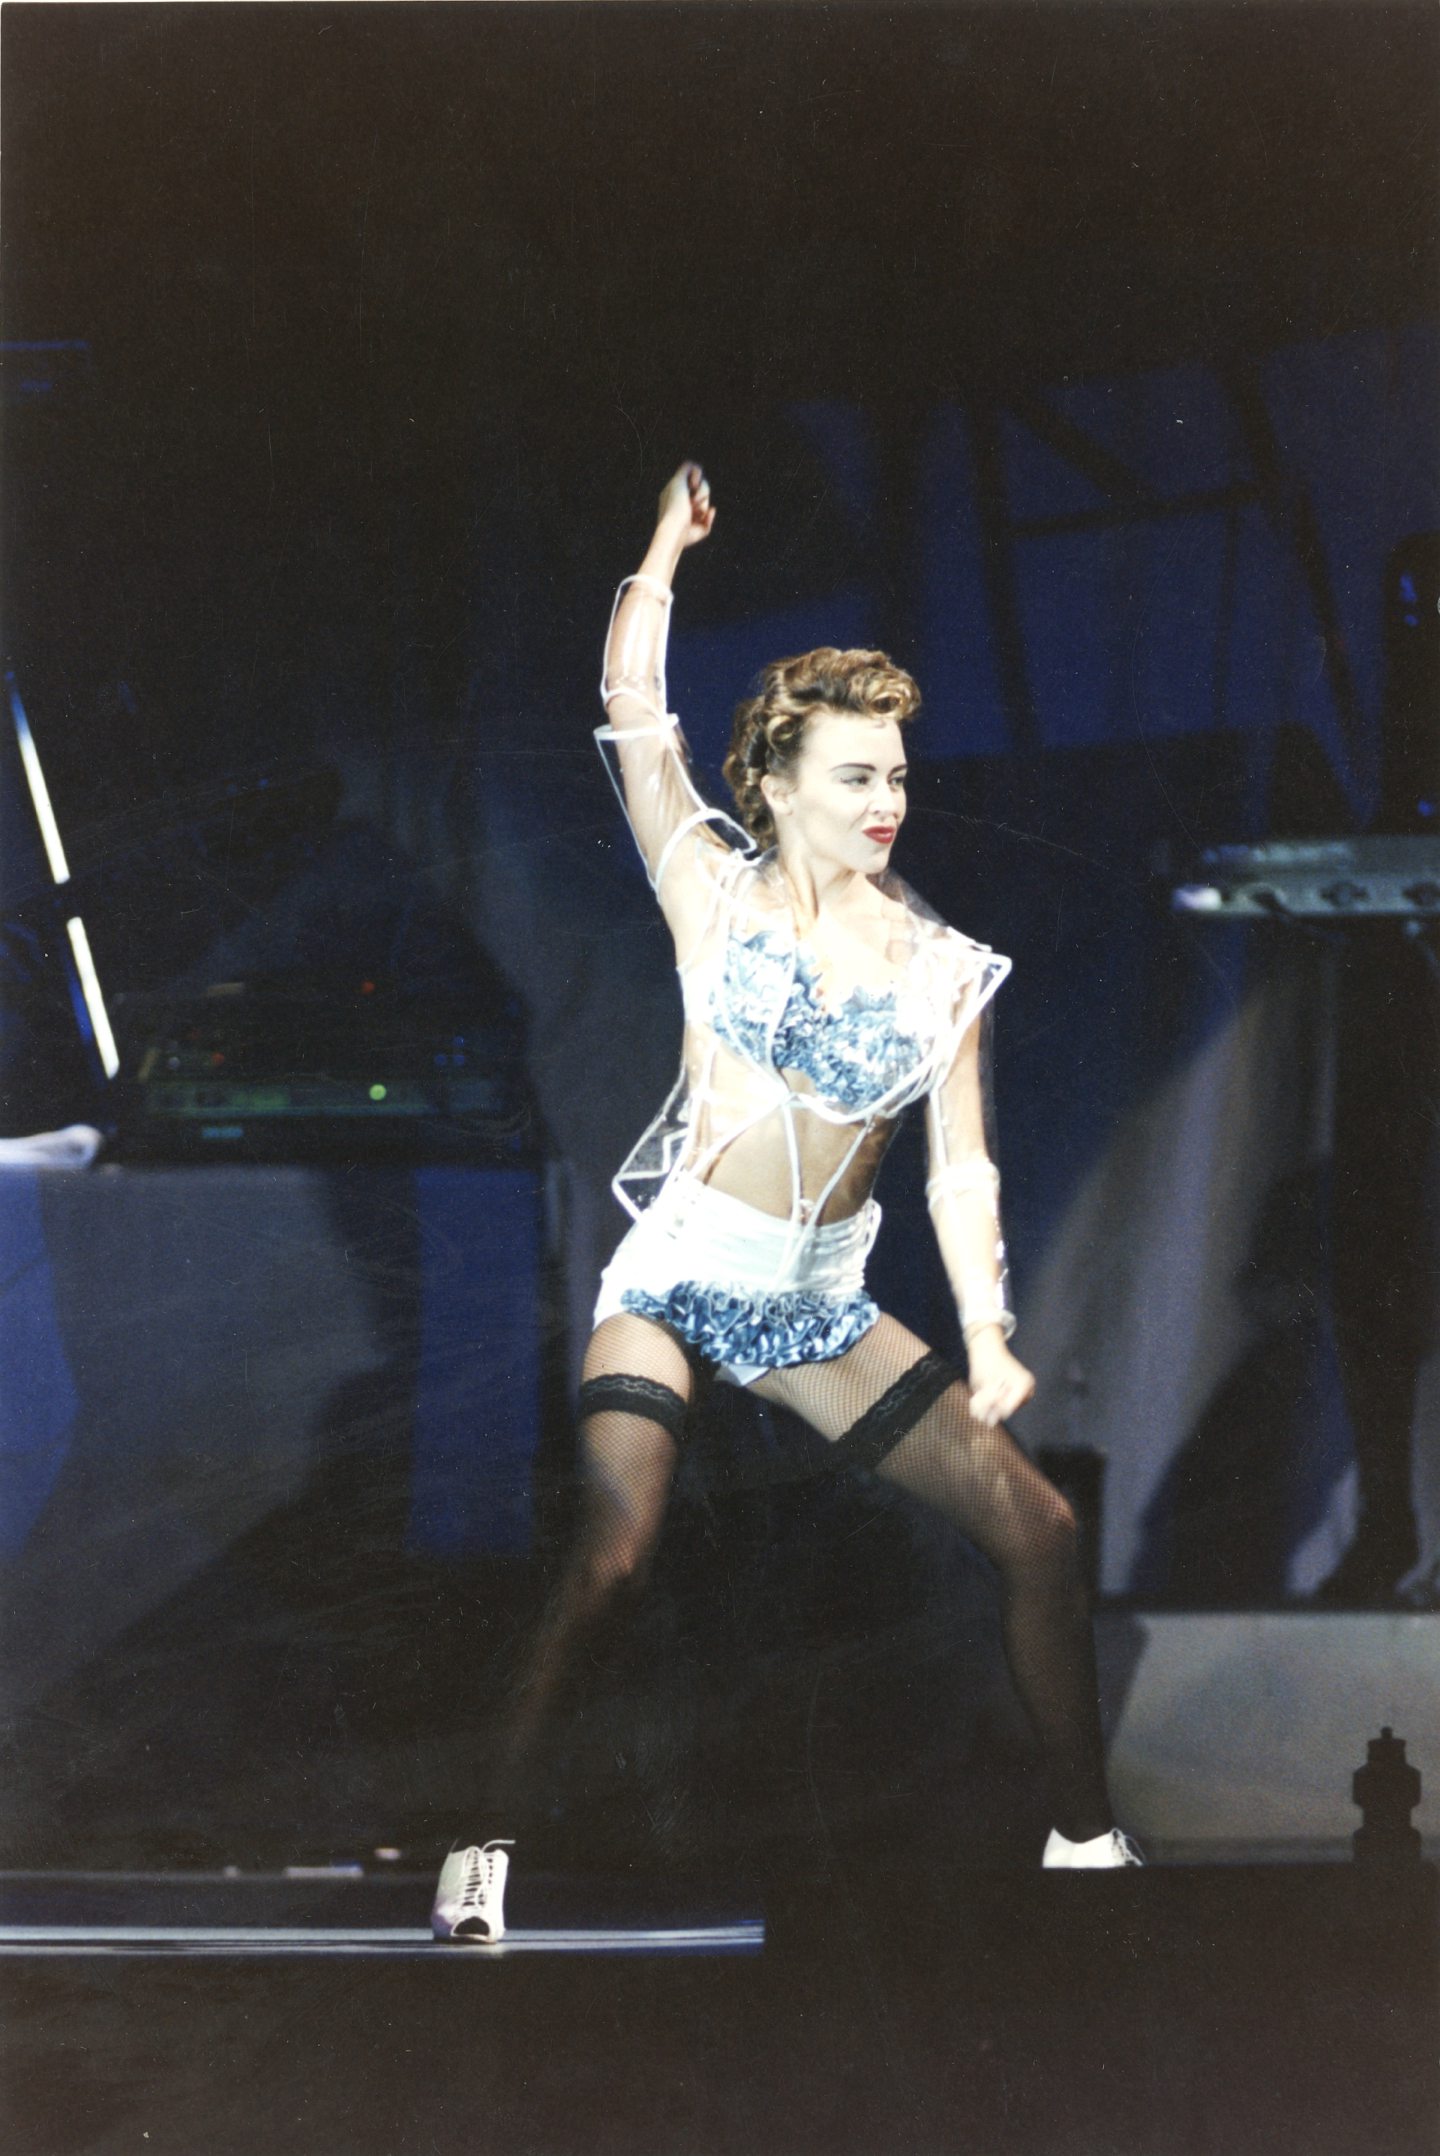 Kylie on stage at the AECC in November 1991.